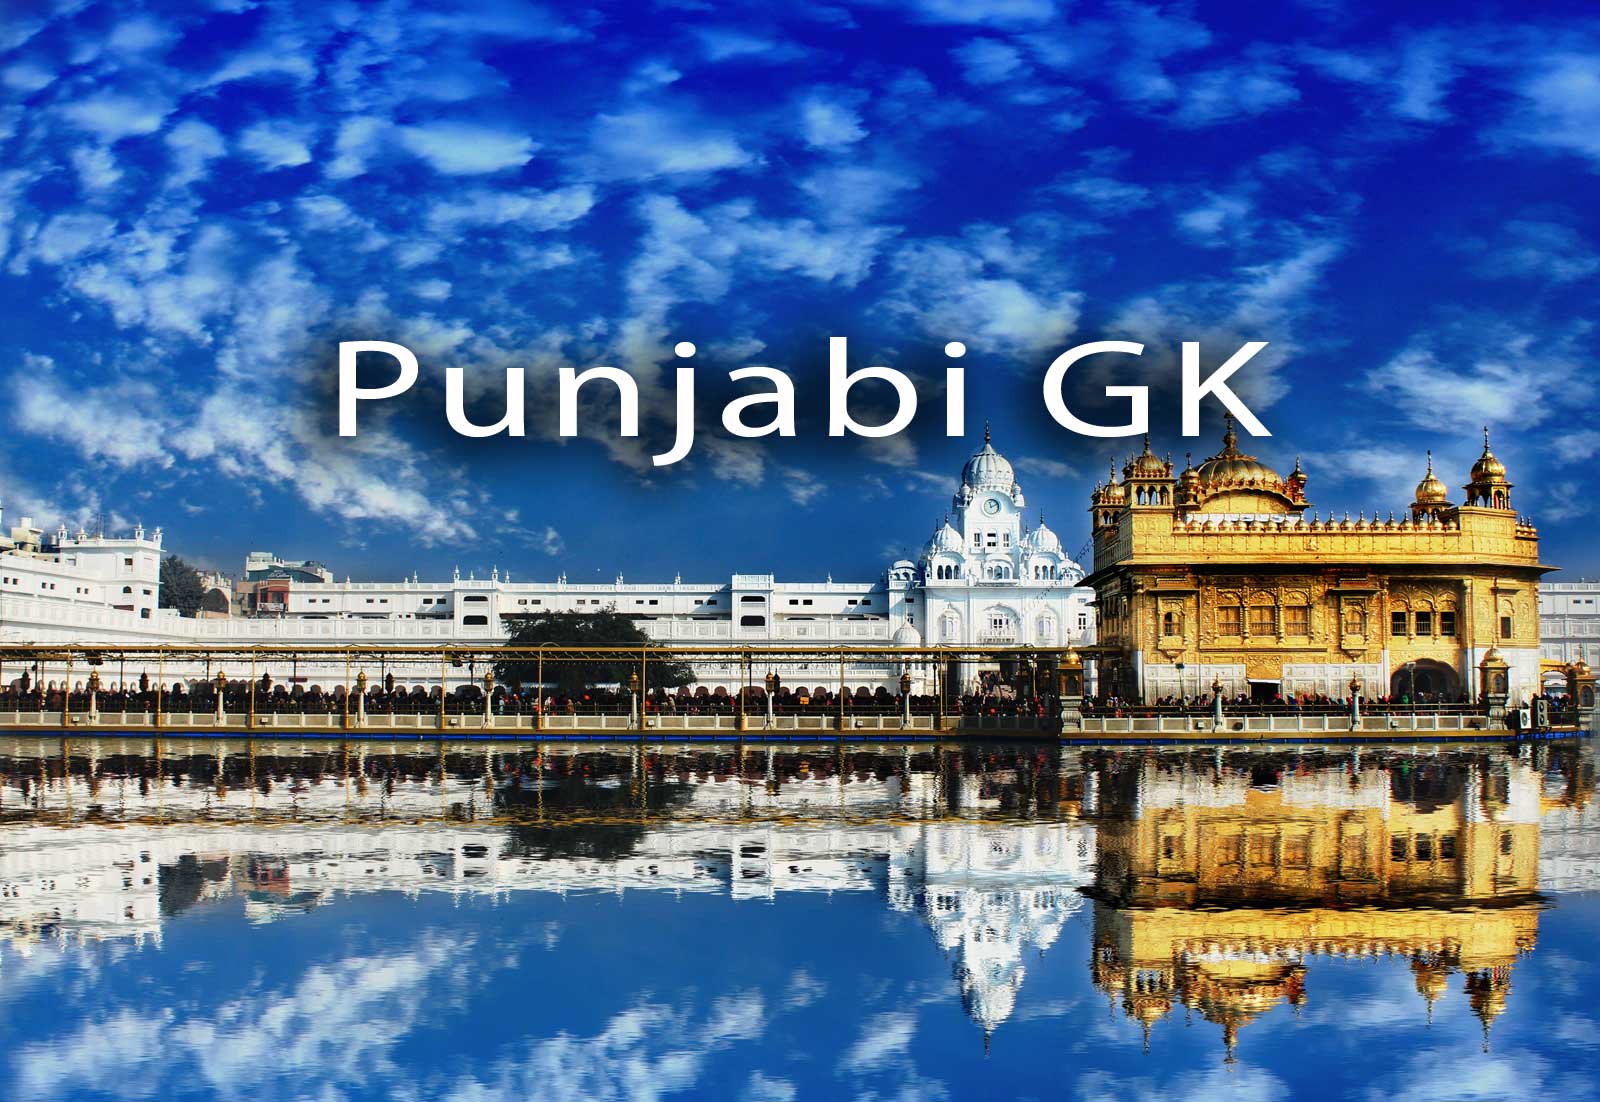 Punjabi GK Mock Test Questions and Answers